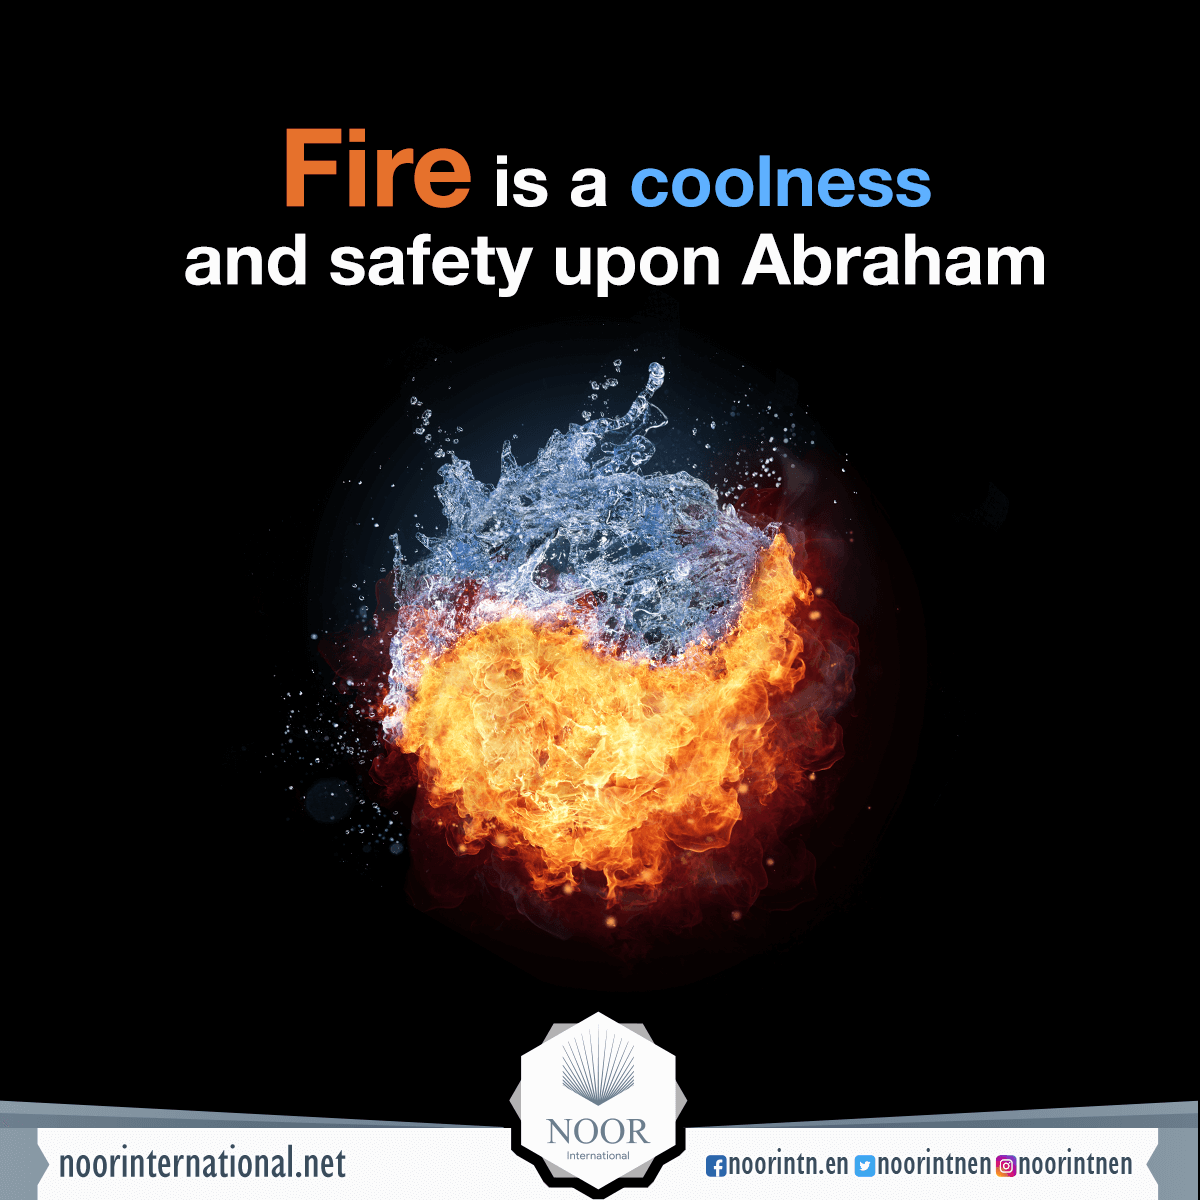 Fire is a coolness and safety upon Abraham